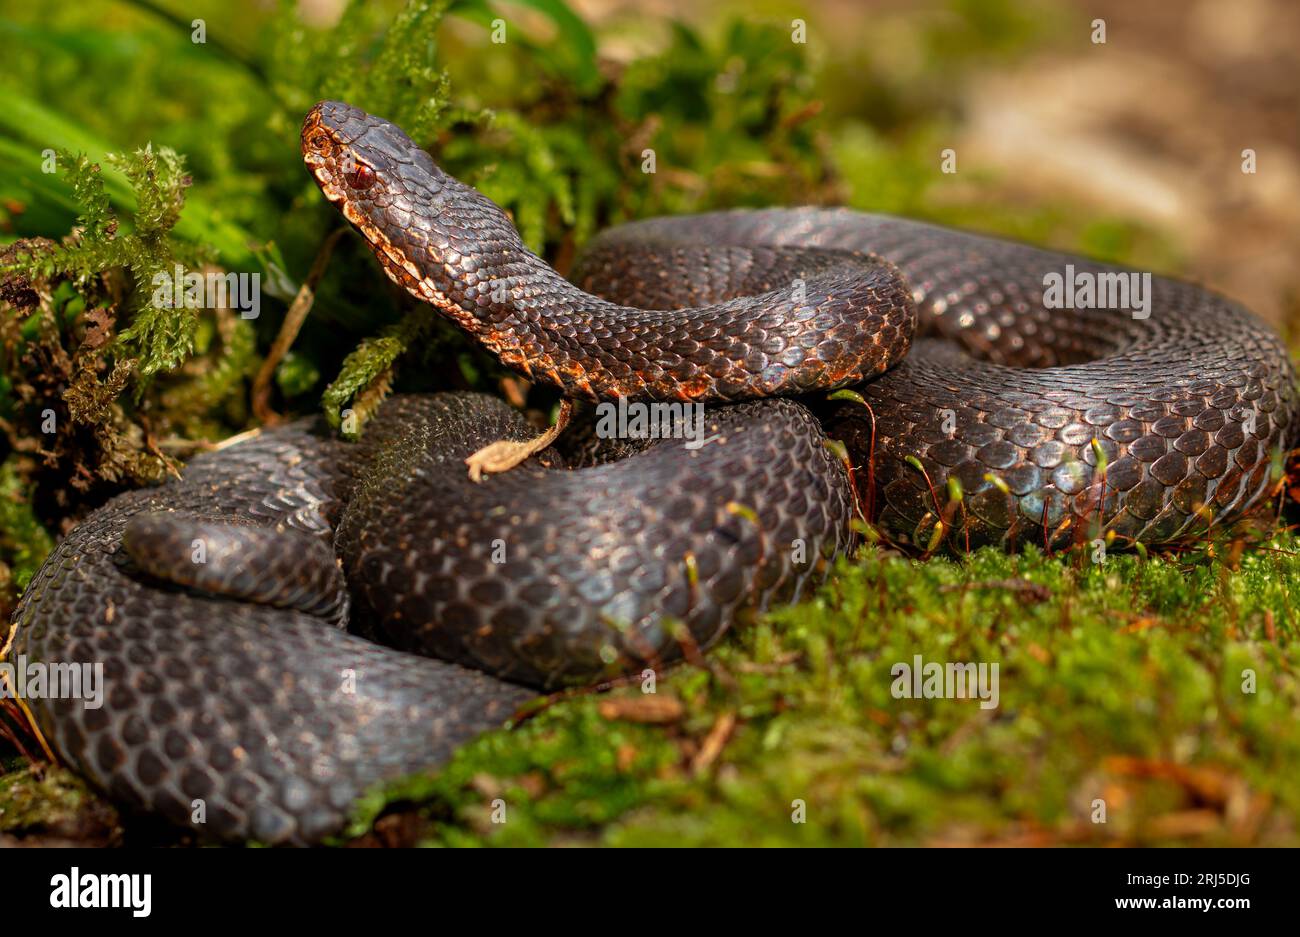 A closeup of a snake coiled and resting atop a bed of lush moss in a natural setting Stock Photo